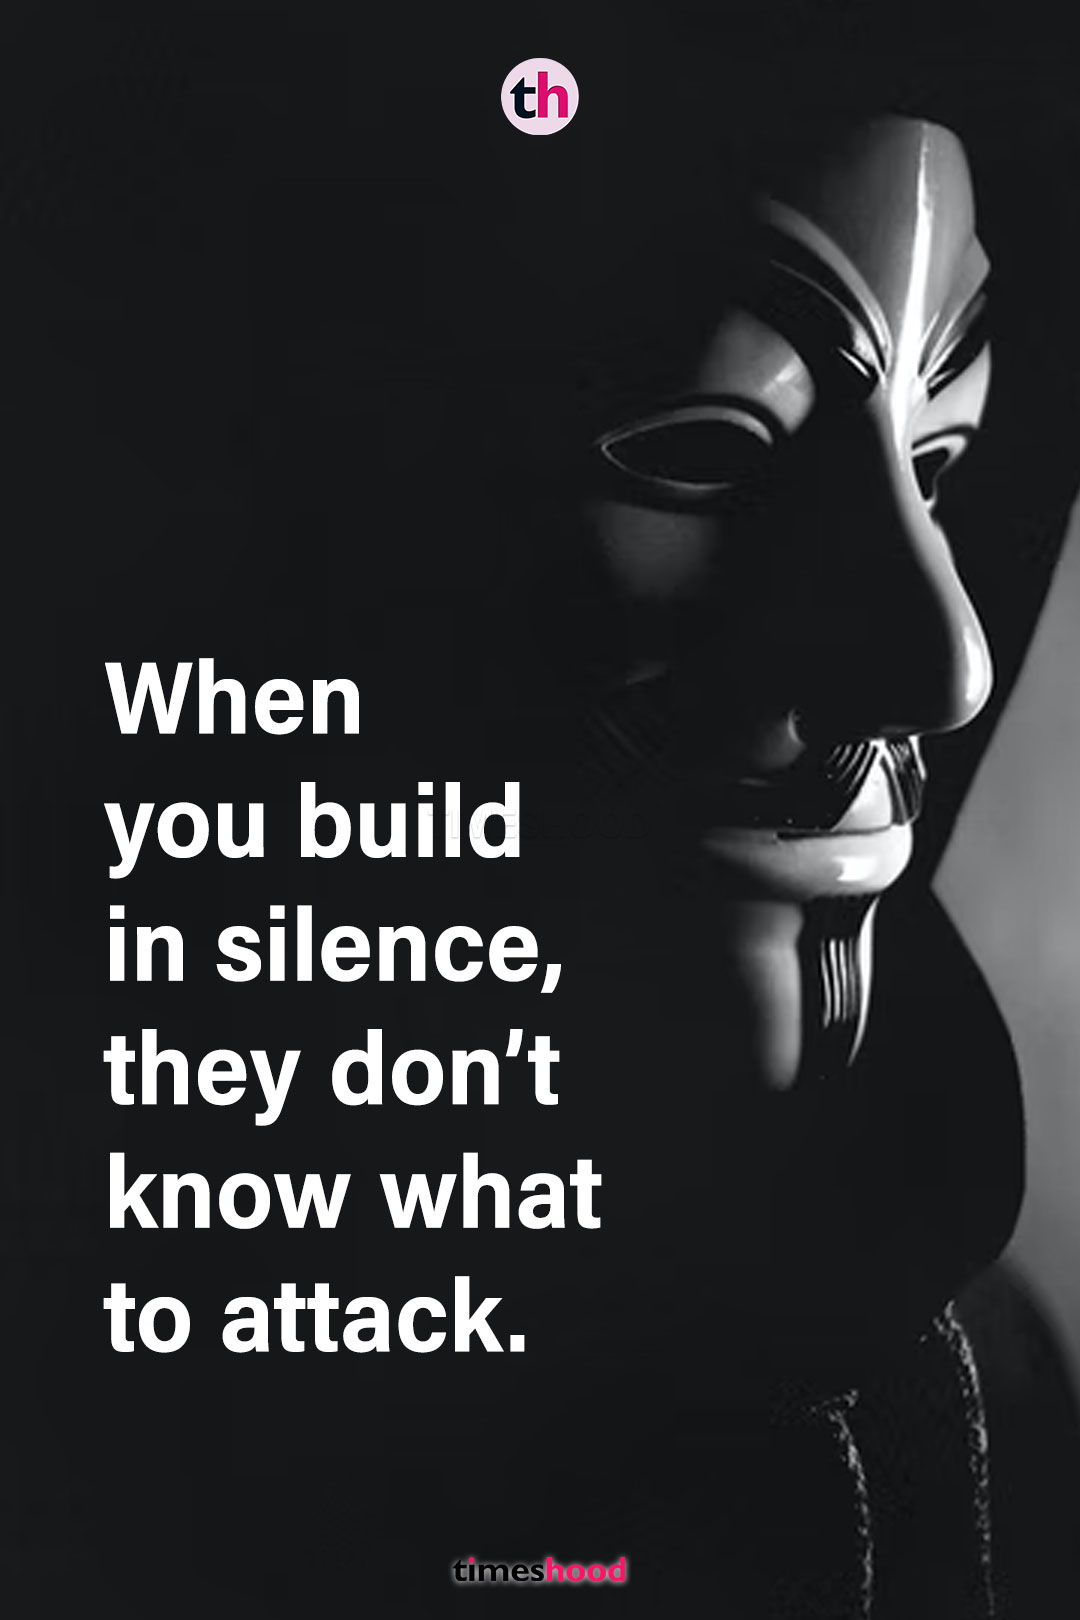 When you build in silence - quotes on silence attitude